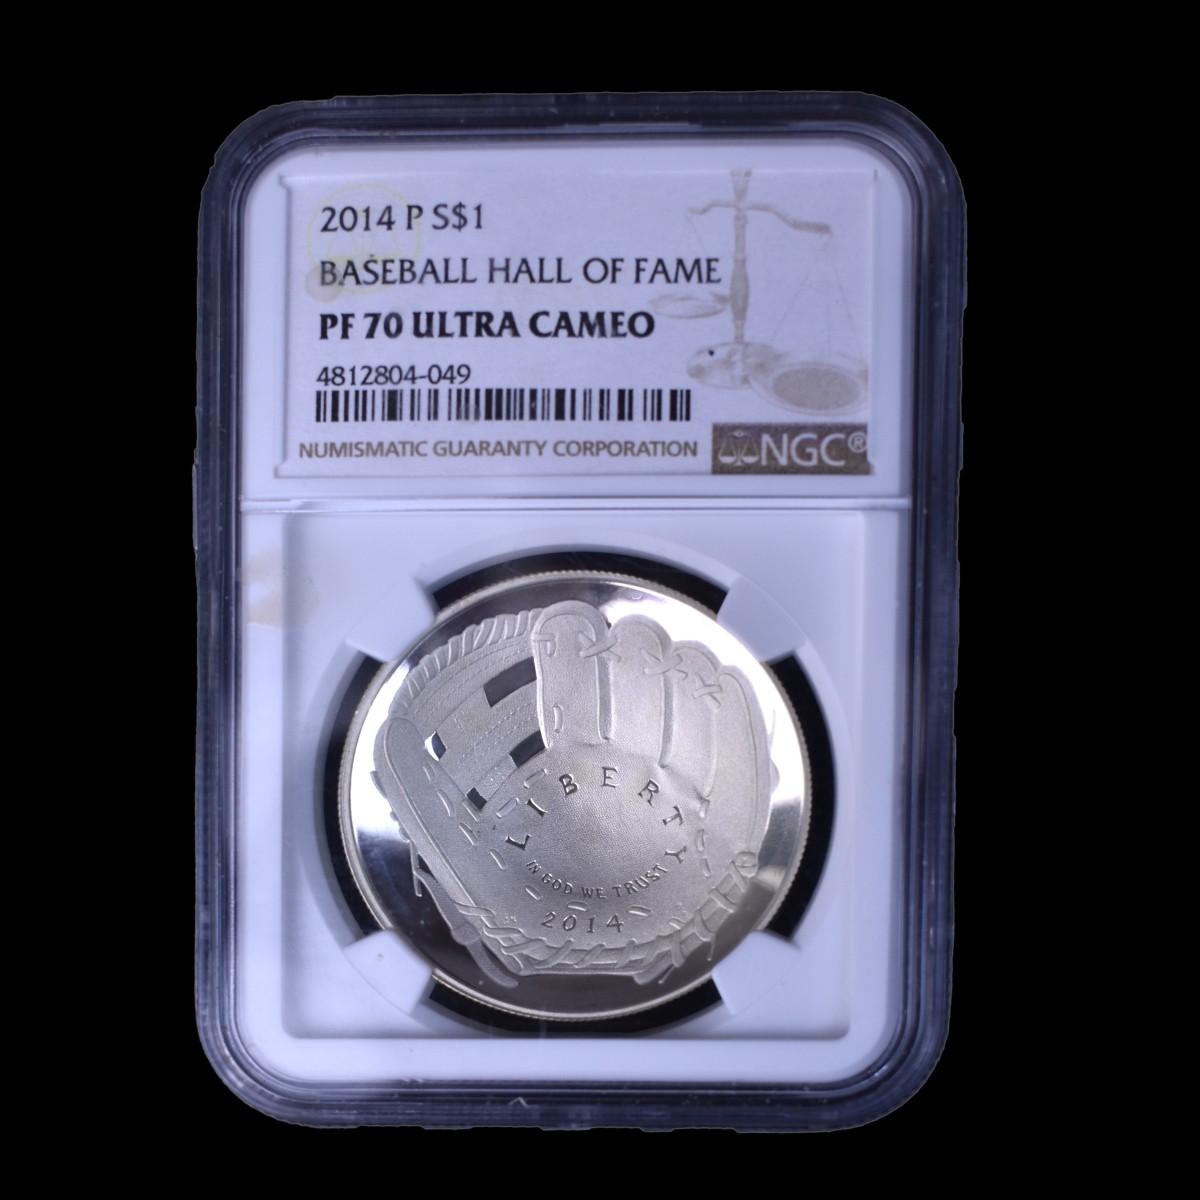 2014-P $1 Baseball Hall of Fame Silver Coin